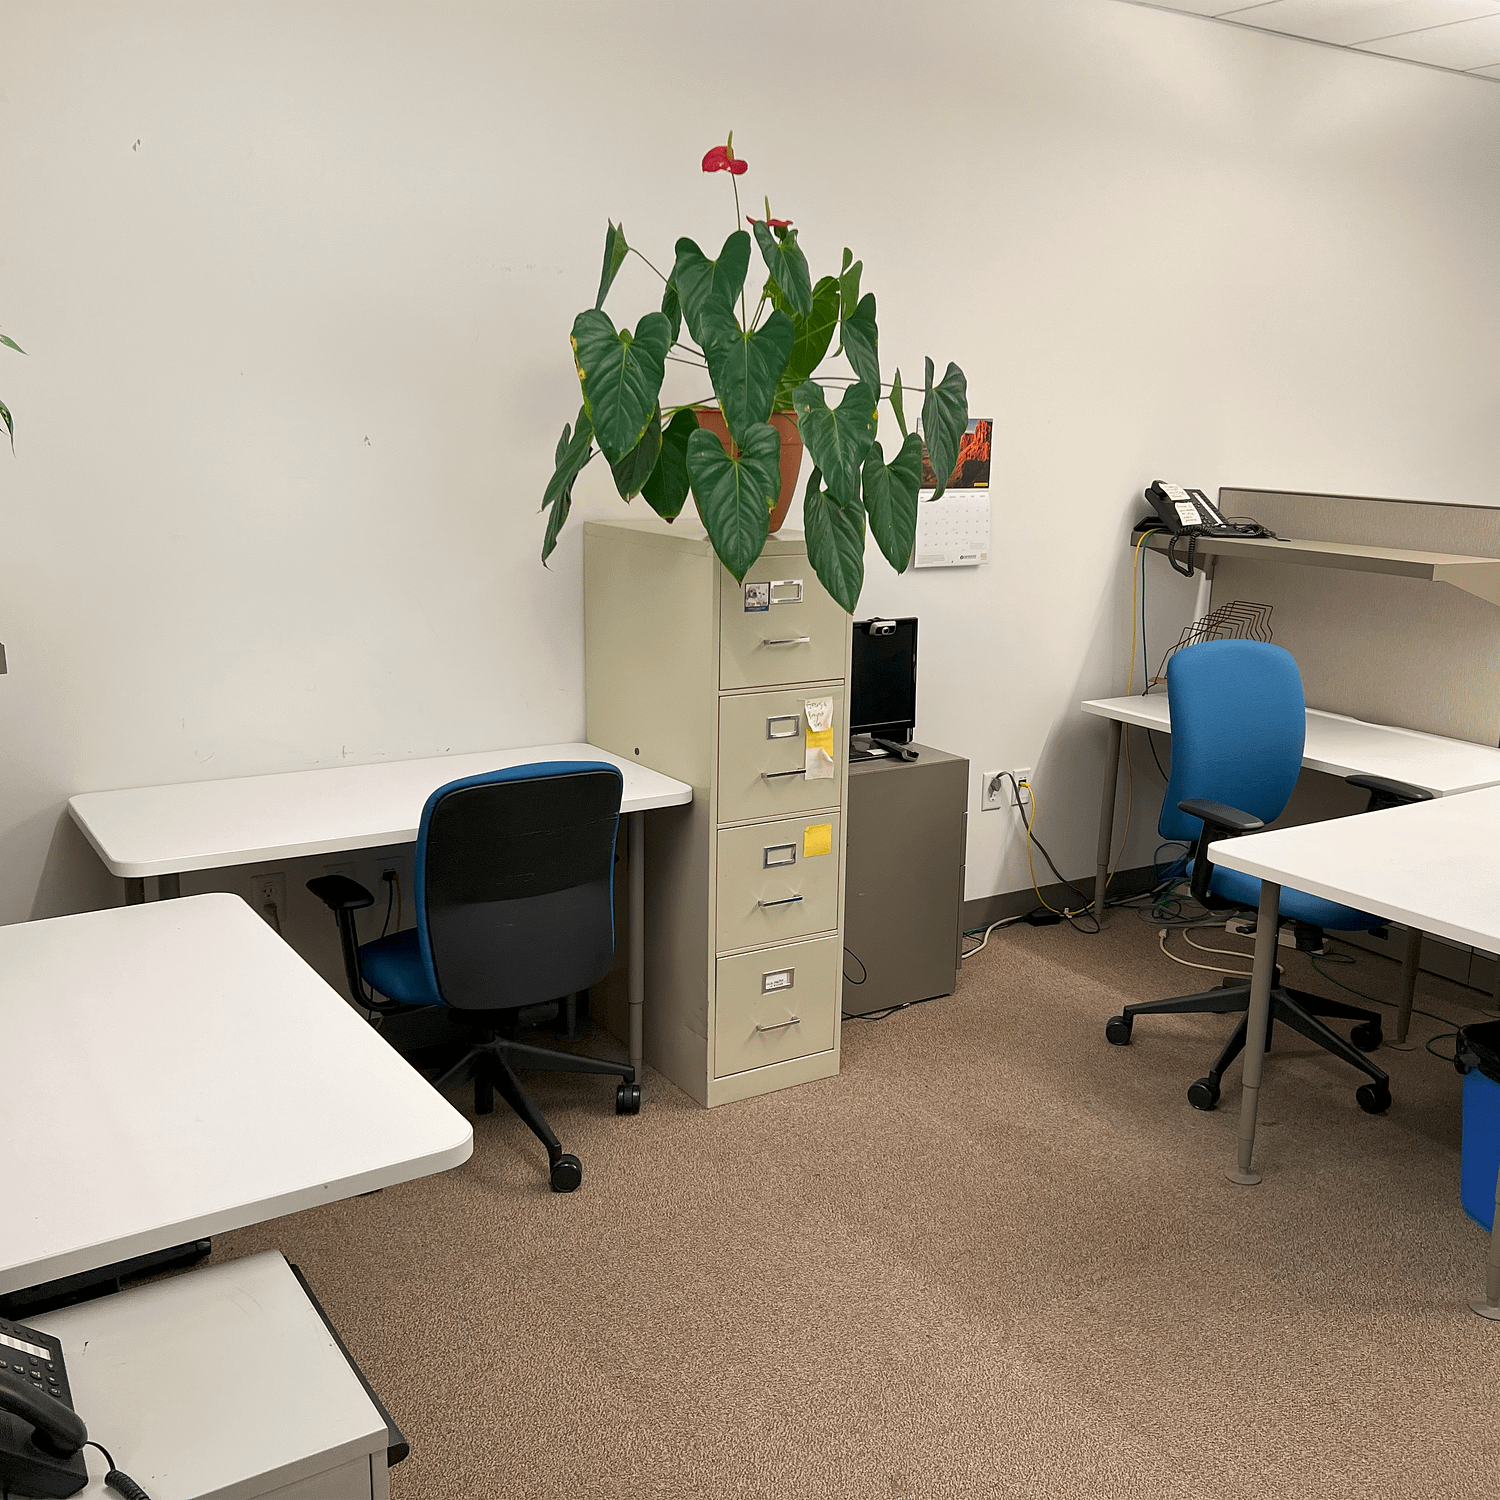 Back cubicle, the largest of the 3, with 2 workspaces of two desks and one chair each, seperated by a file cabinet with a large plant on top